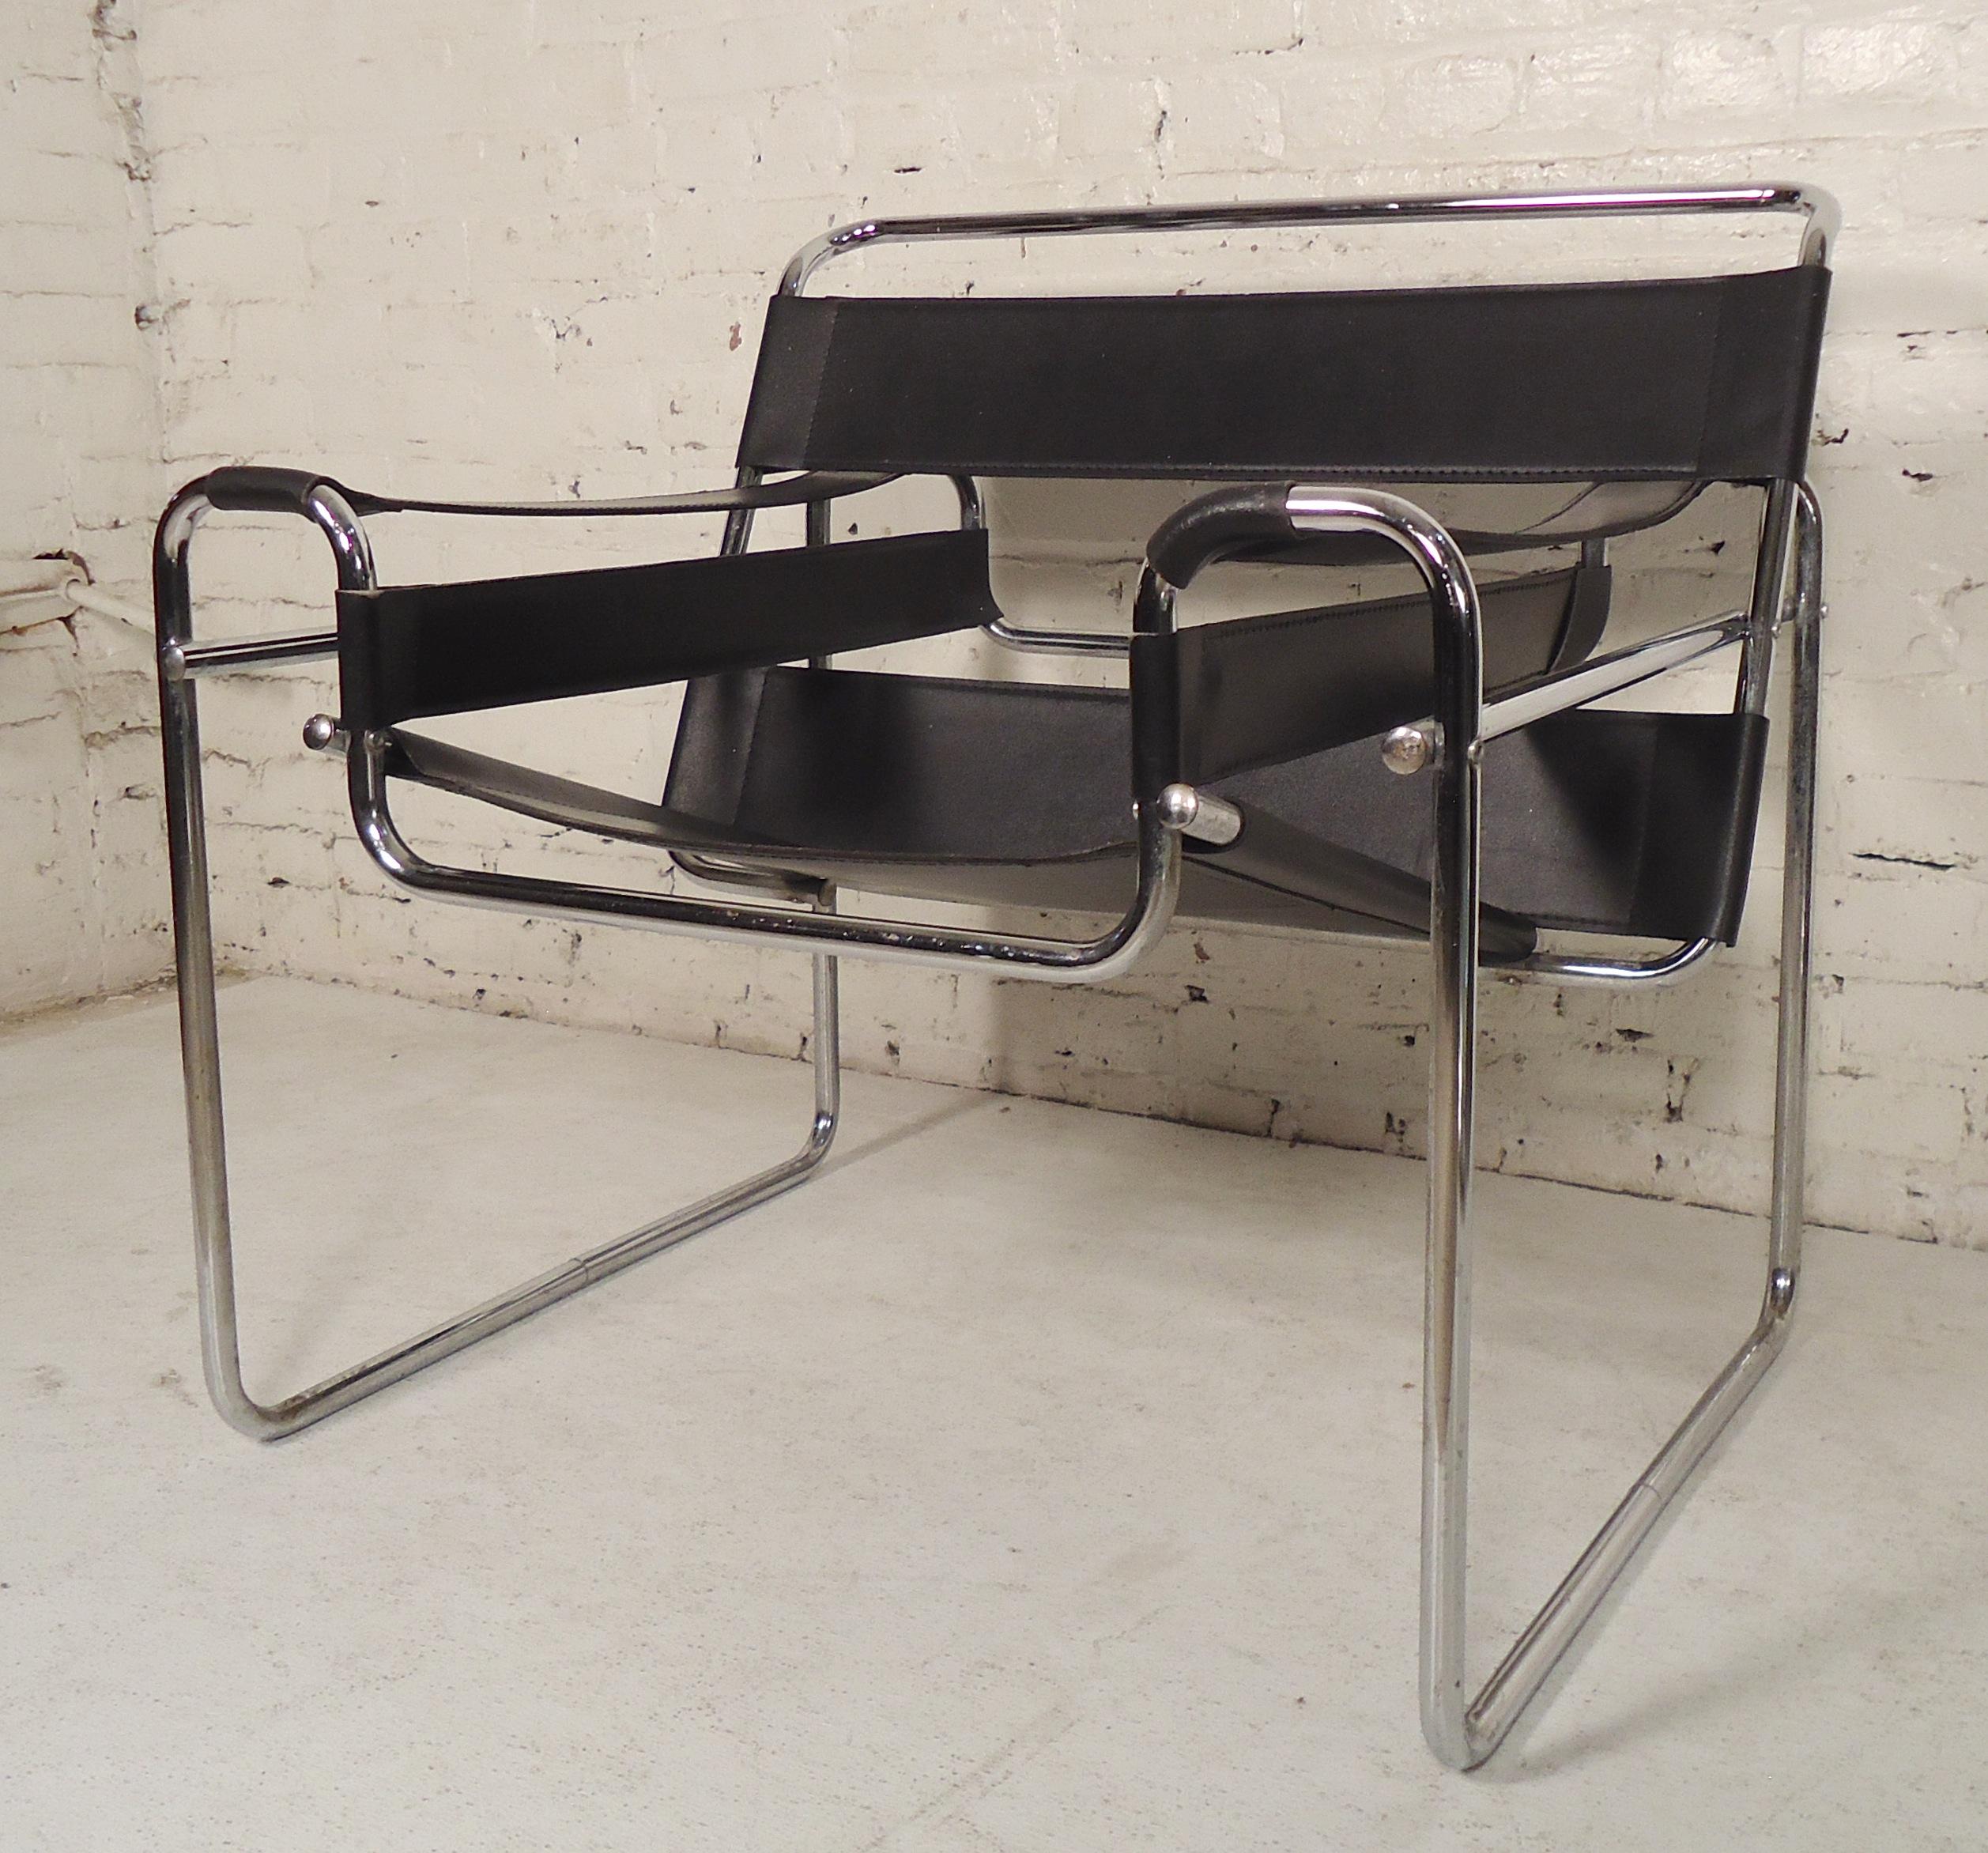 Mid-Century Modern style chairs with polished tubular frame and iconic black straps for the seat, back, and arms.

(Please confirm item location - NY or NJ - with dealer).
 